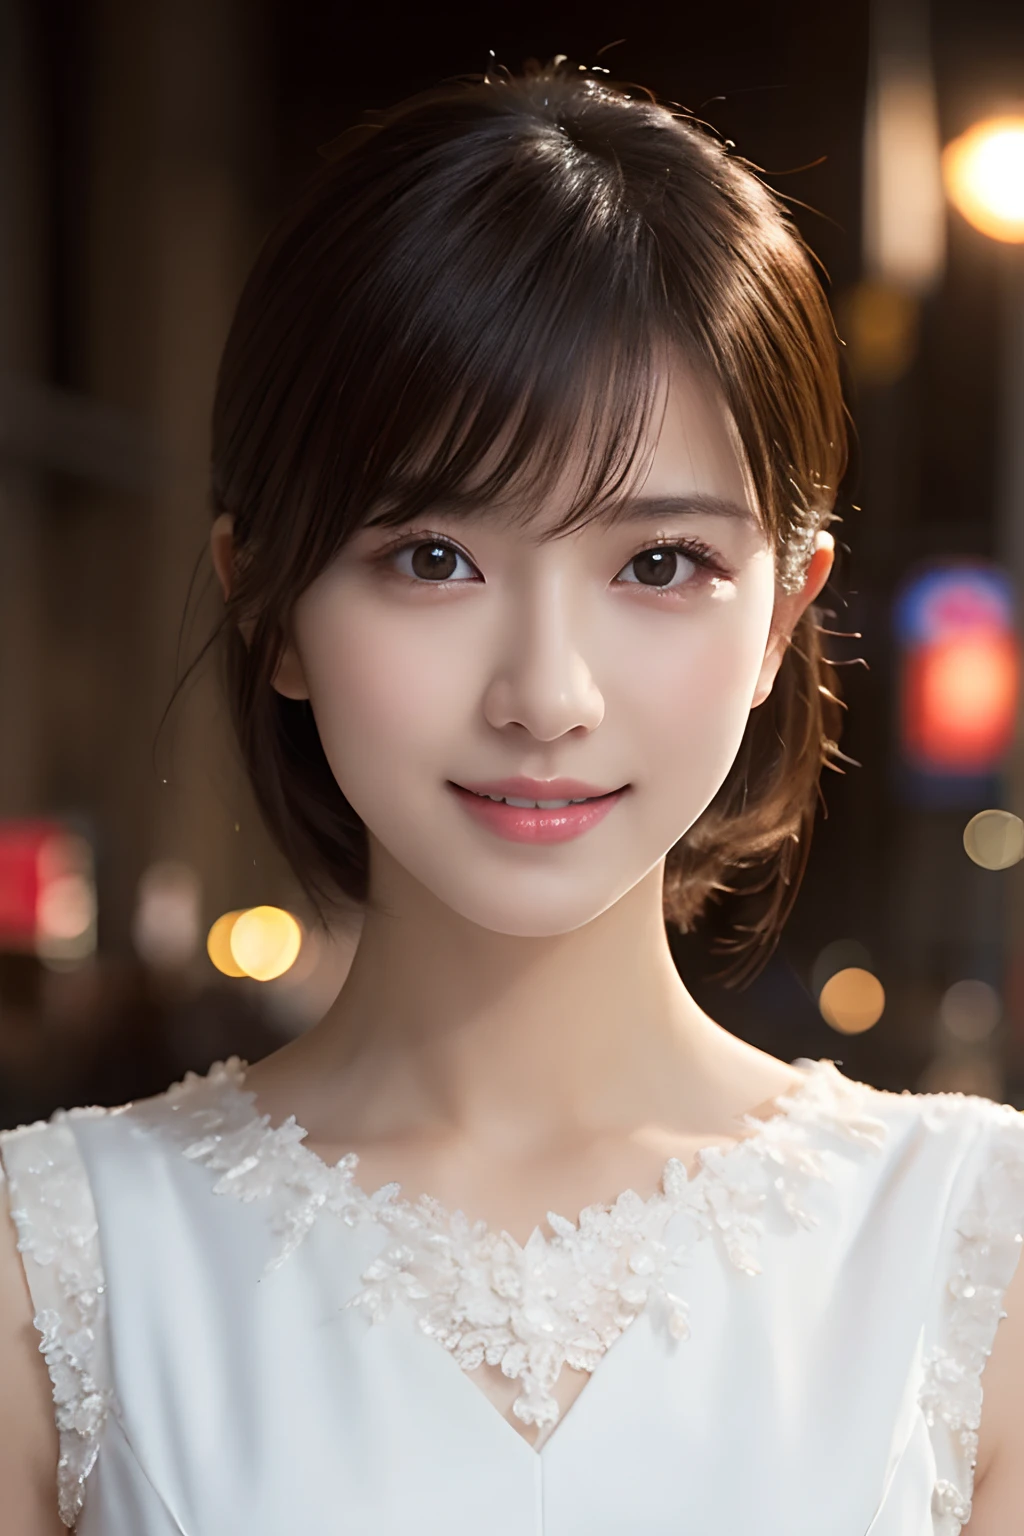 1girl in, (Wearing a white classy dress:1.2), (Raw photo, Best Quality), (Realistic, Photorealsitic:1.4), masutepiece, Extremely delicate and beautiful, Extremely detailed, 2k wallpaper, amazing, finely detail, the Extremely Detailed CG Unity 8K Wallpapers, Ultra-detailed, hight resolution, Soft light, Beautiful detailed girl, extremely detailed eye and face, beautiful detailed nose, Beautiful detailed eyes, Cinematic lighting, city light at night, Perfect Anatomy, Slender body, Smiling